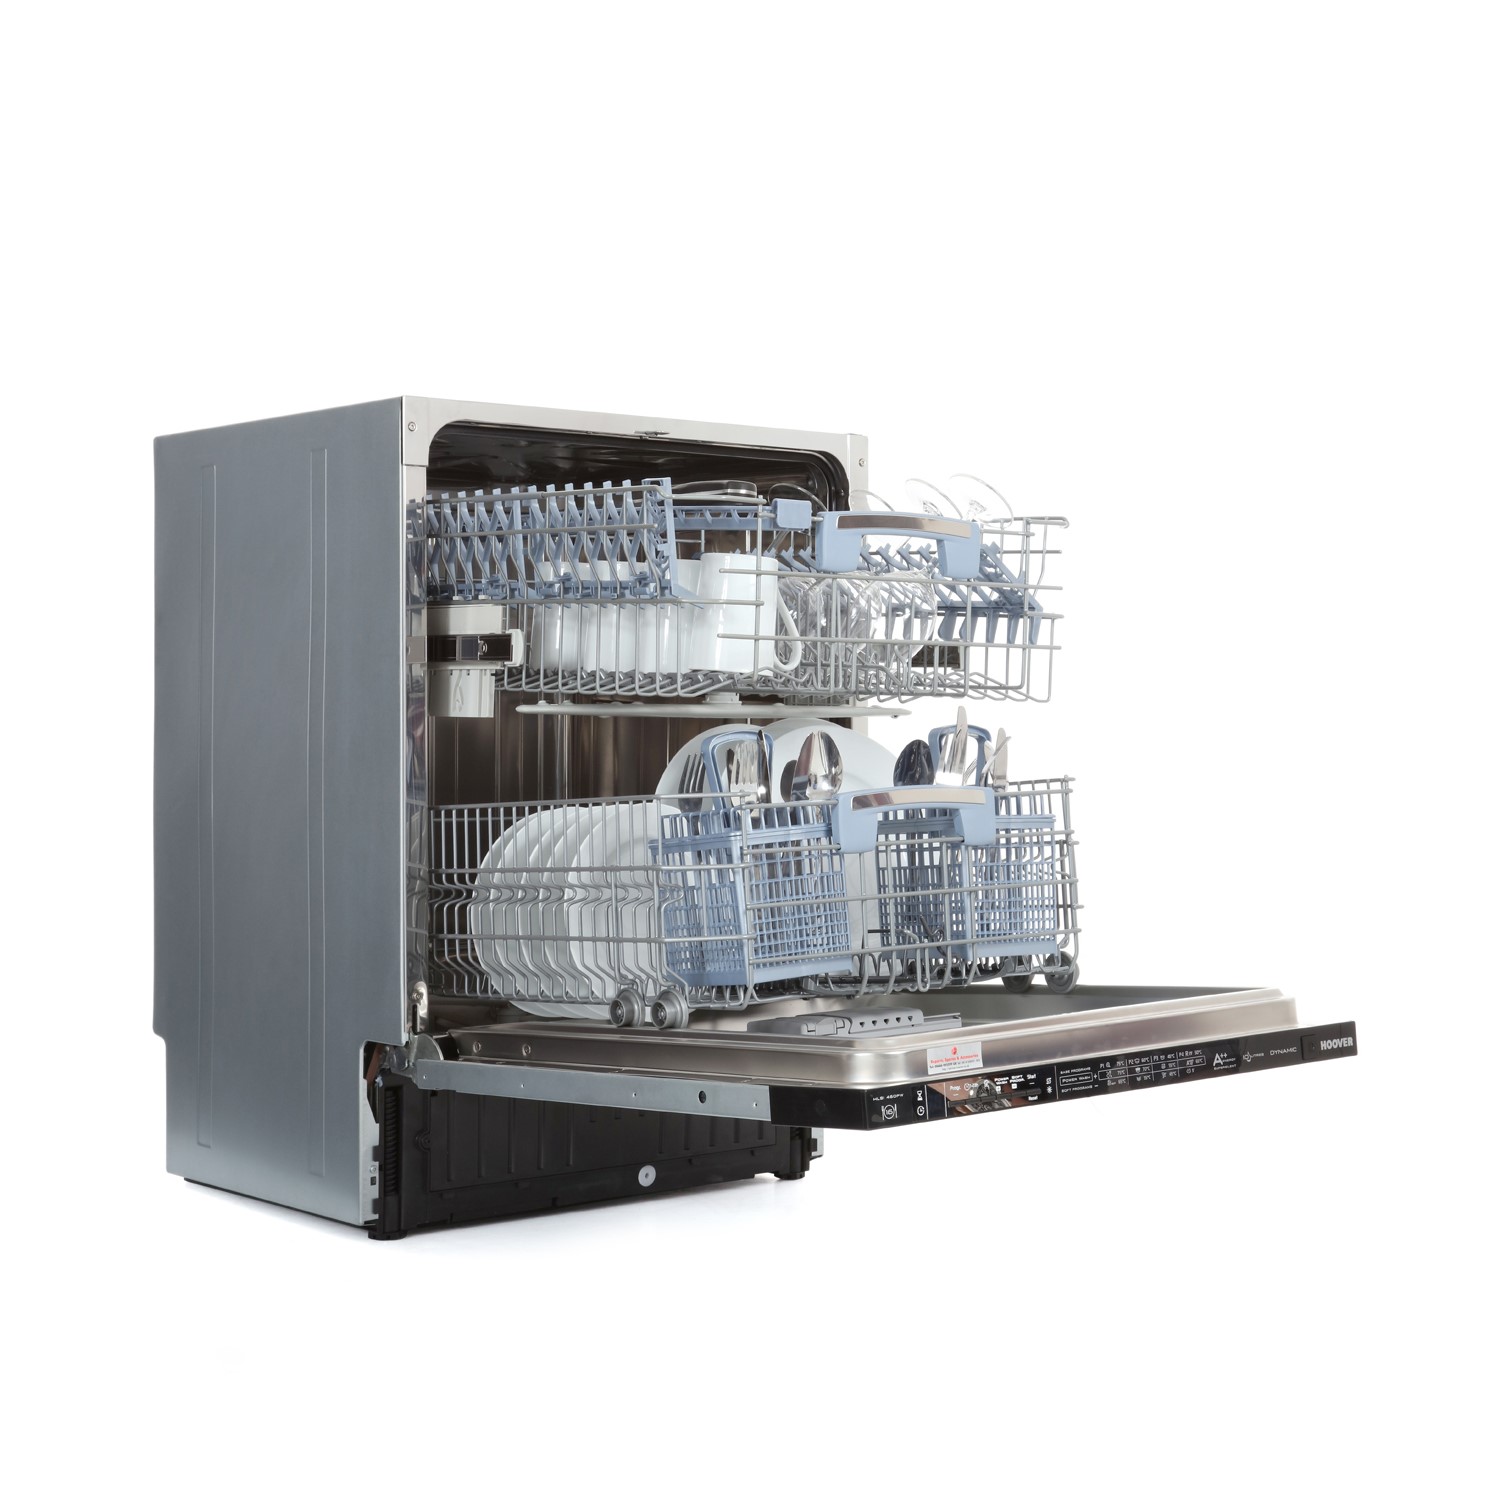 hoover integrated dishwasher reviews